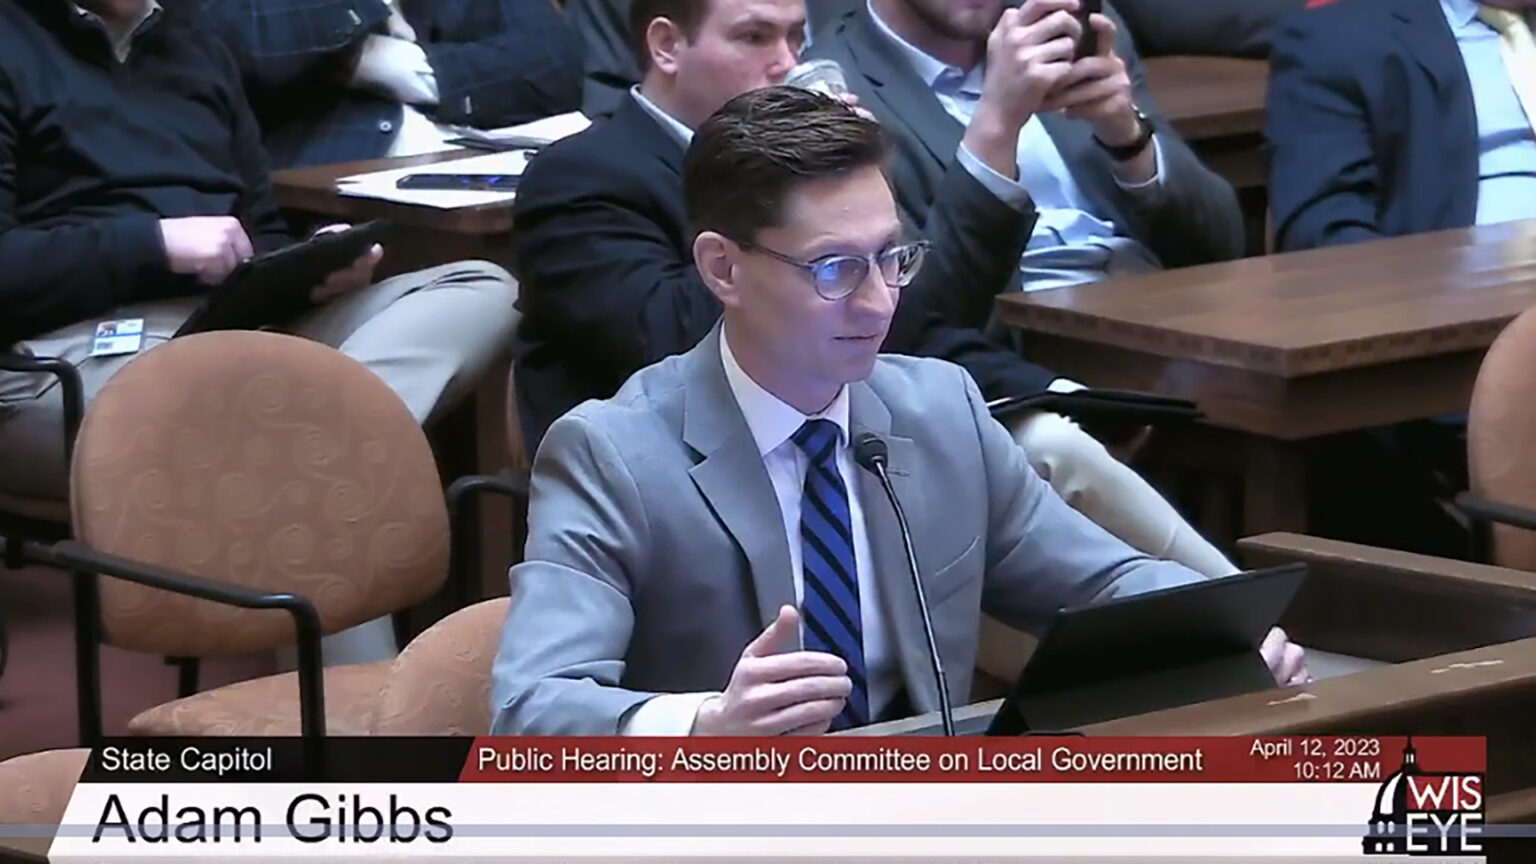 A screenshot shows Adam Gibbs seated at a desk while speaking into a microphone and looking at a laptop computer screen, with other people seated in the background, with a video graphic on the bottom of the image noting his name, the date and setting as a public hearing of the Assembly Committee on Local Government.